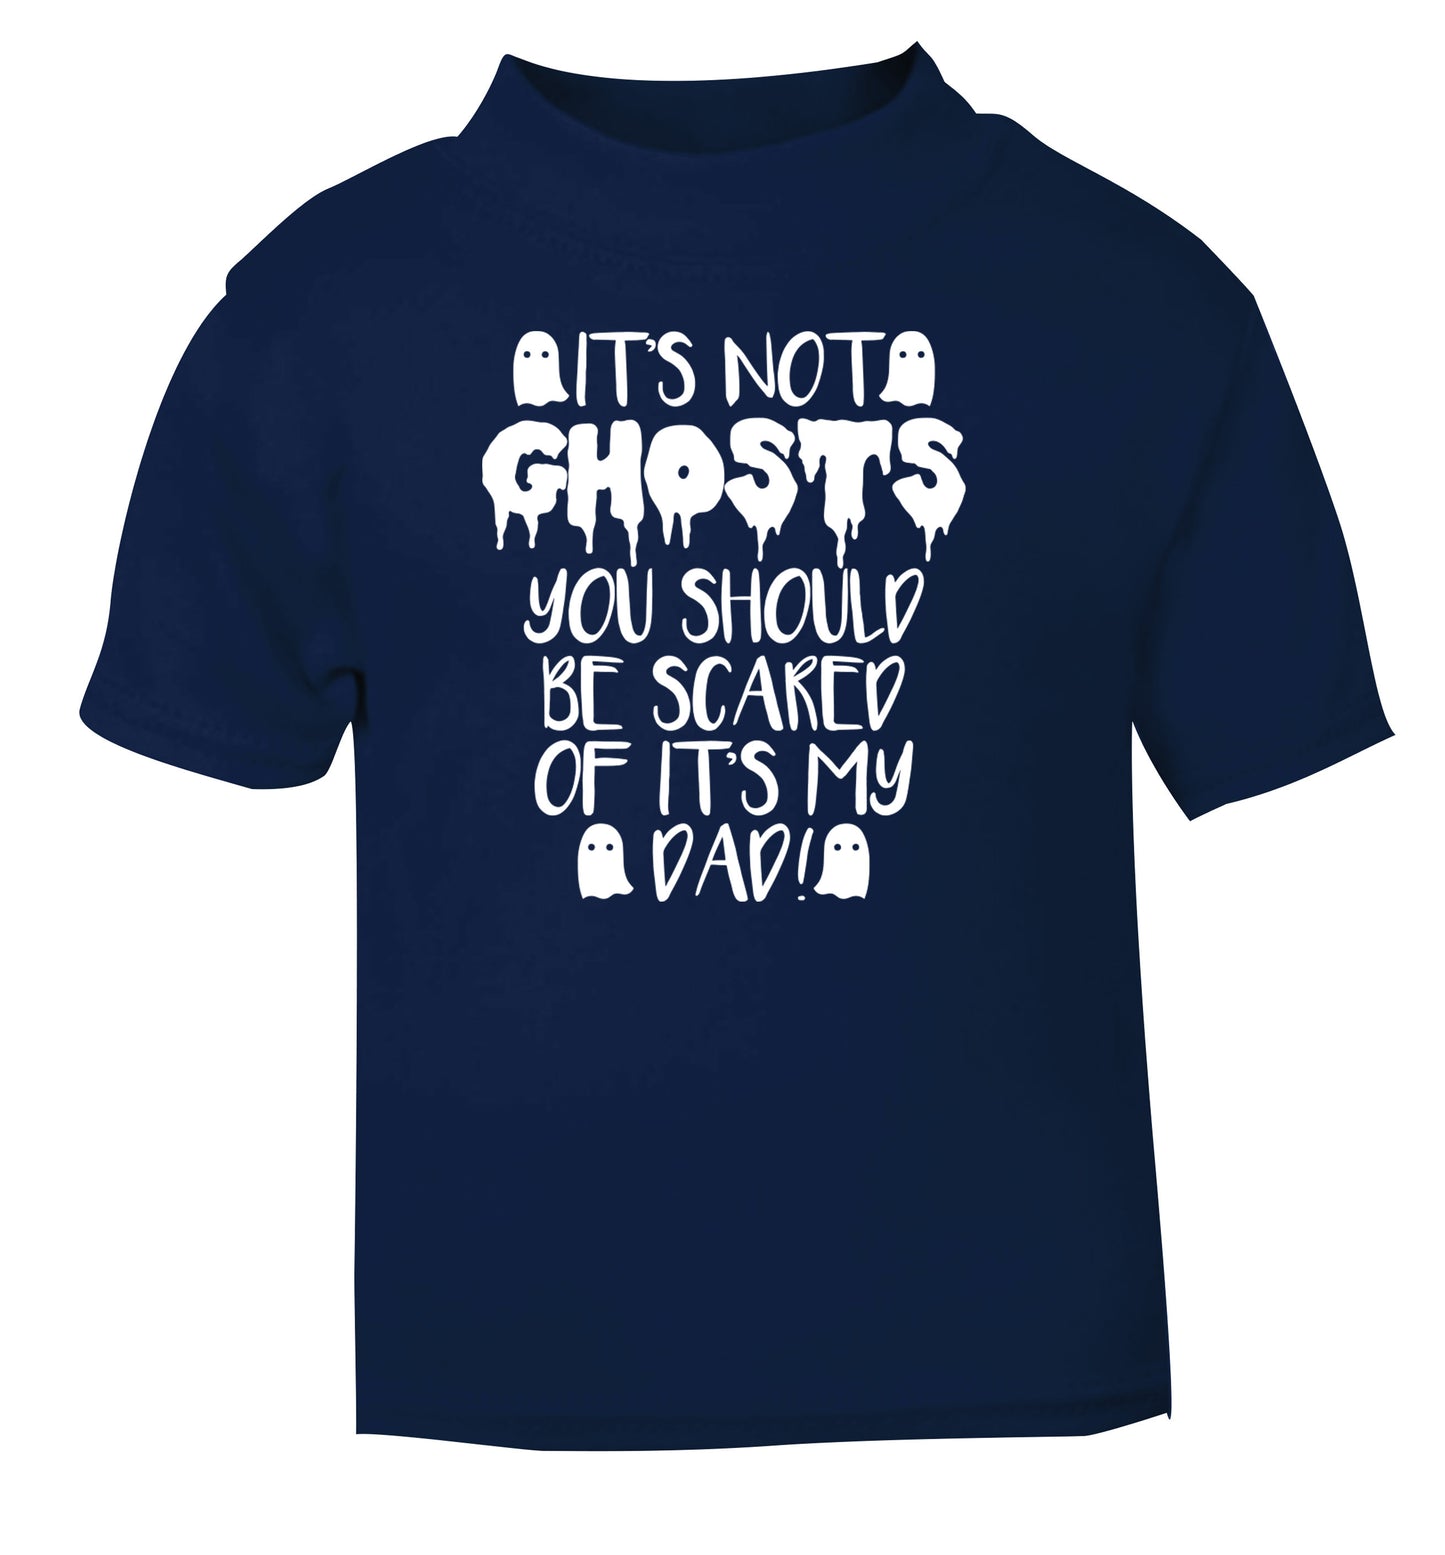 It's not ghosts you should be scared of it's my dad! navy Baby Toddler Tshirt 2 Years